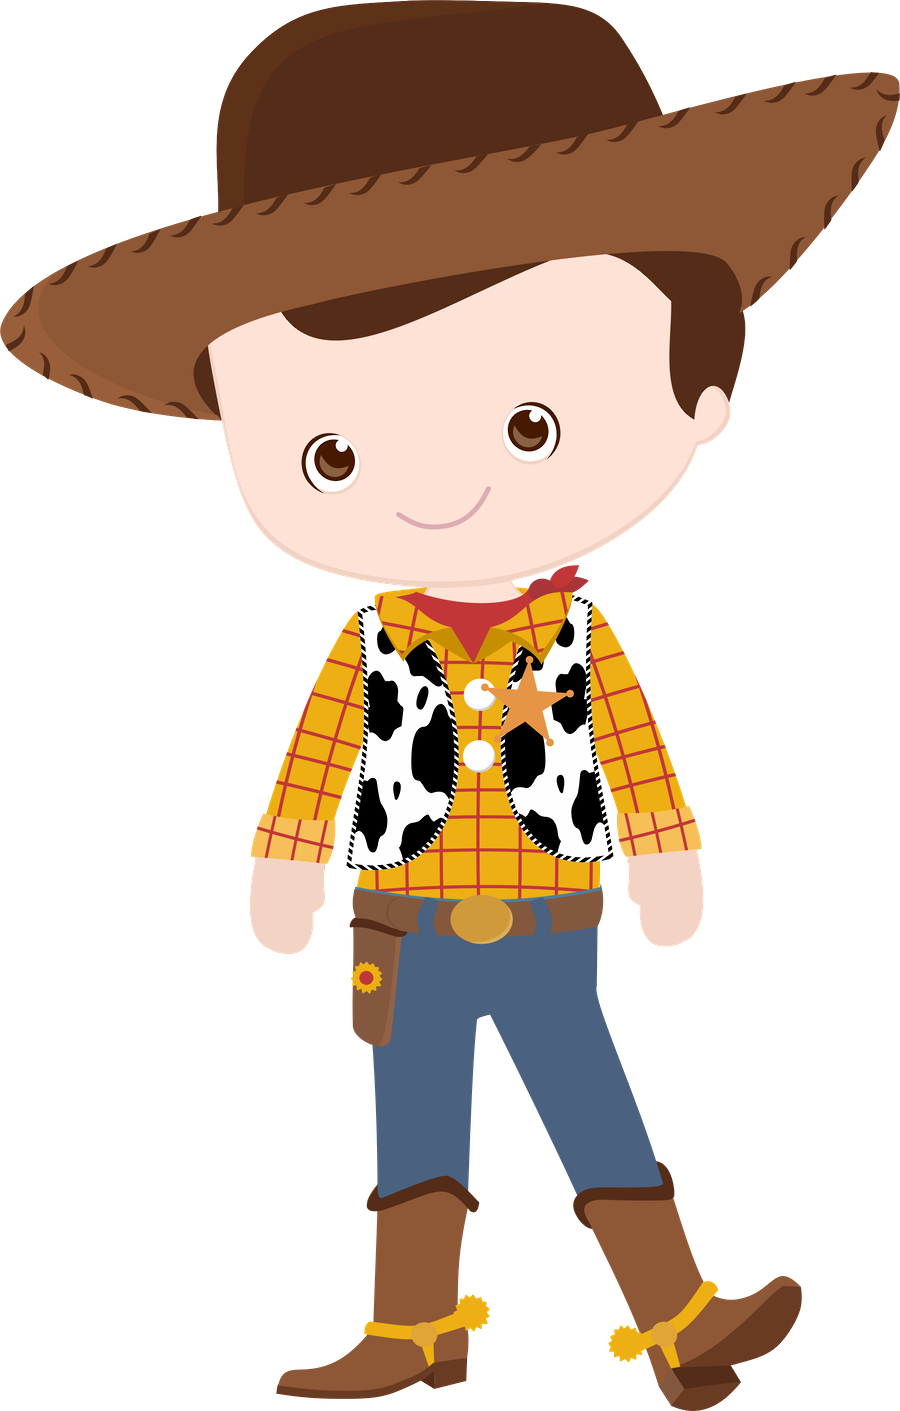 Animated Cowboy Character Illustration PNG